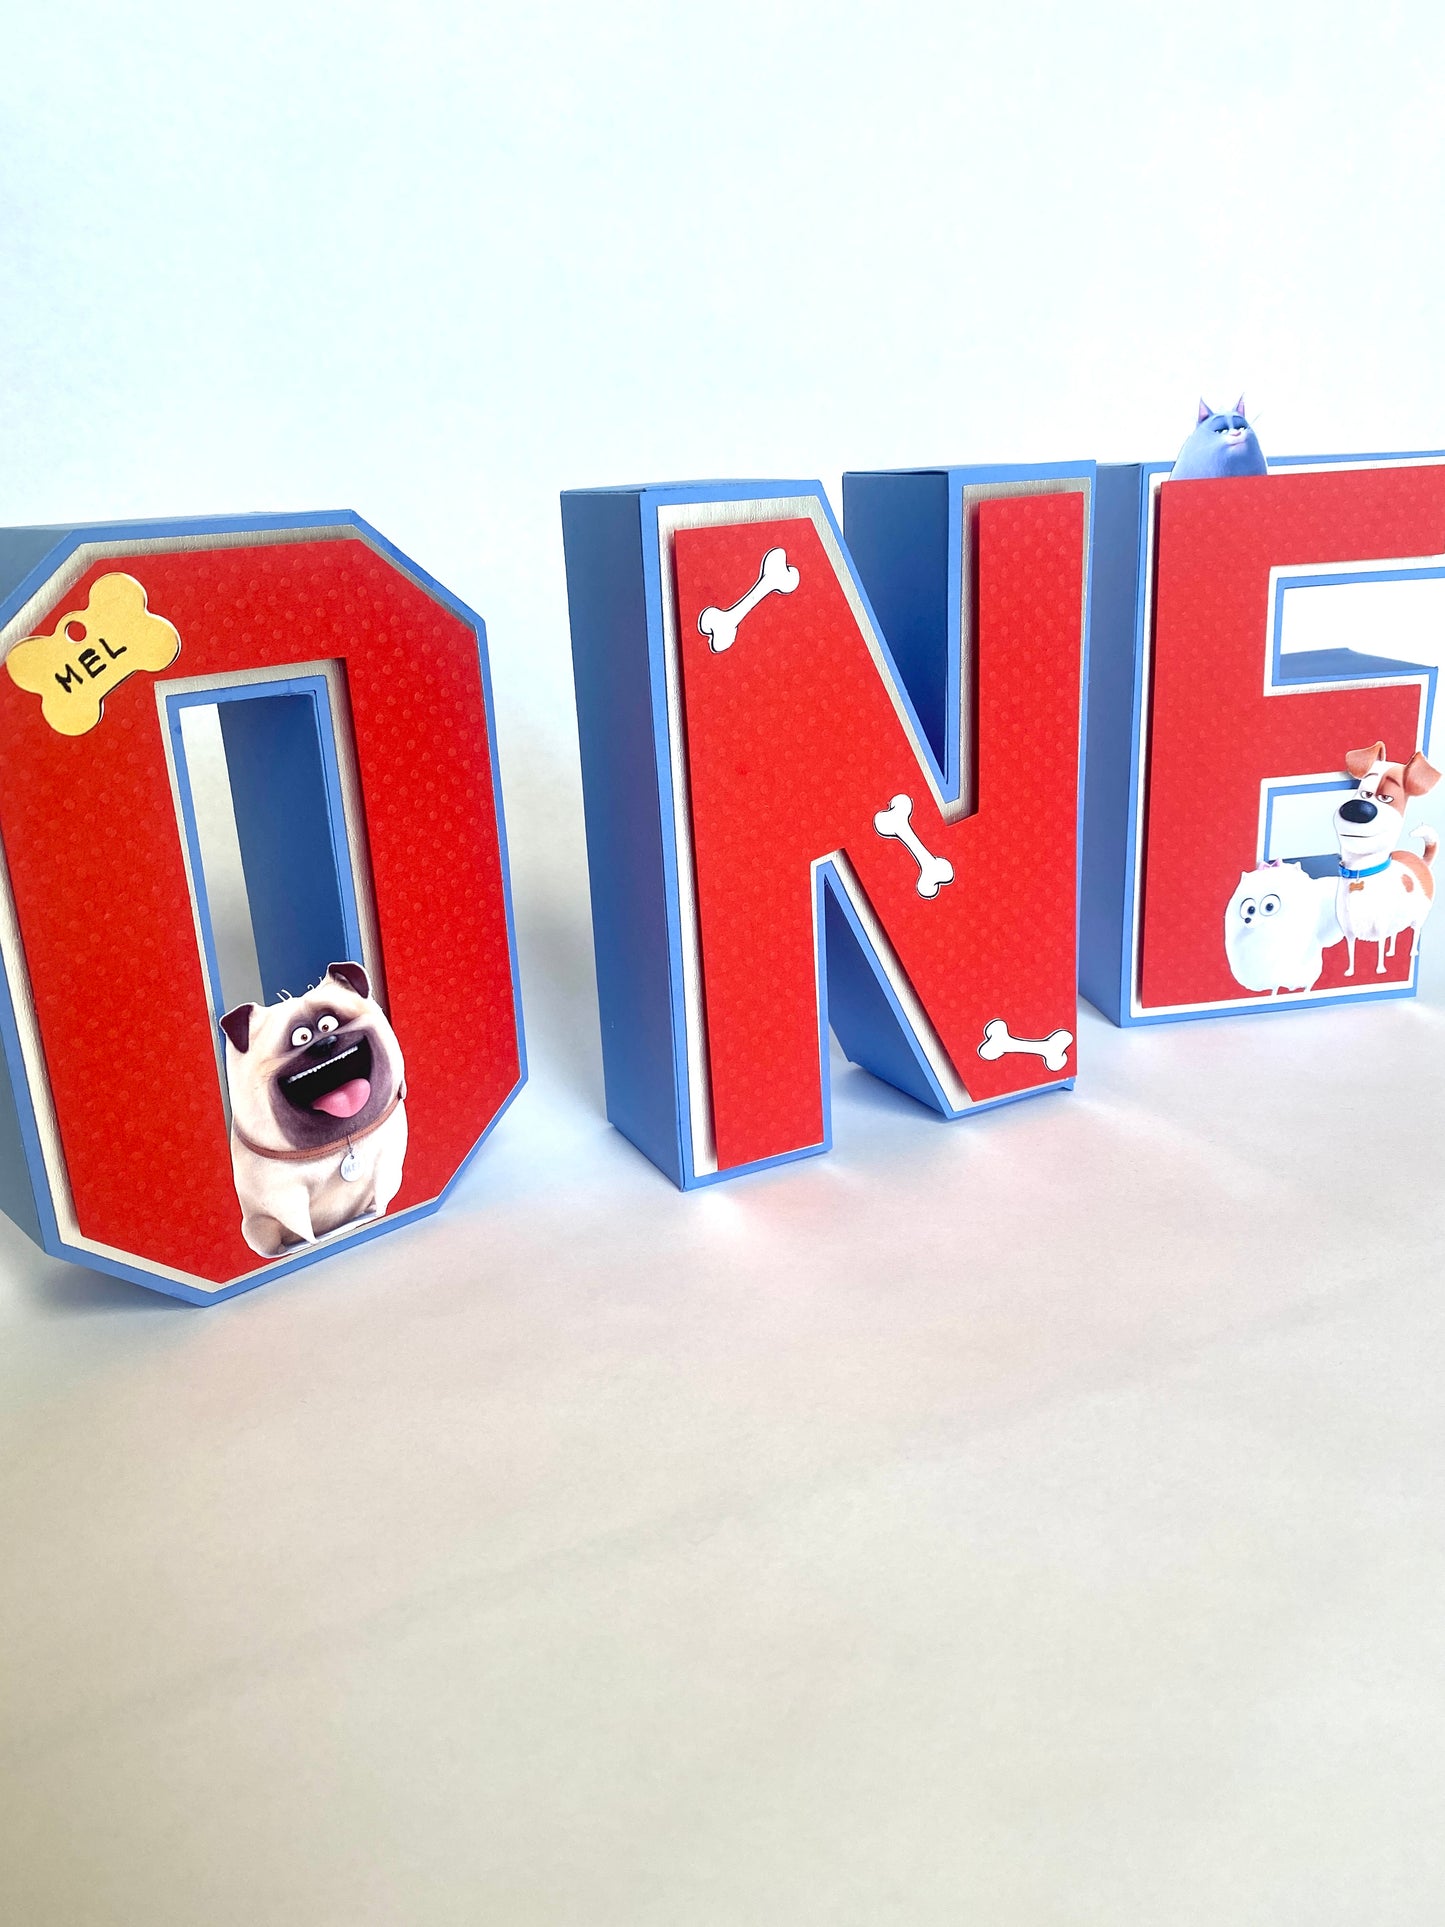 3D Customized Letters